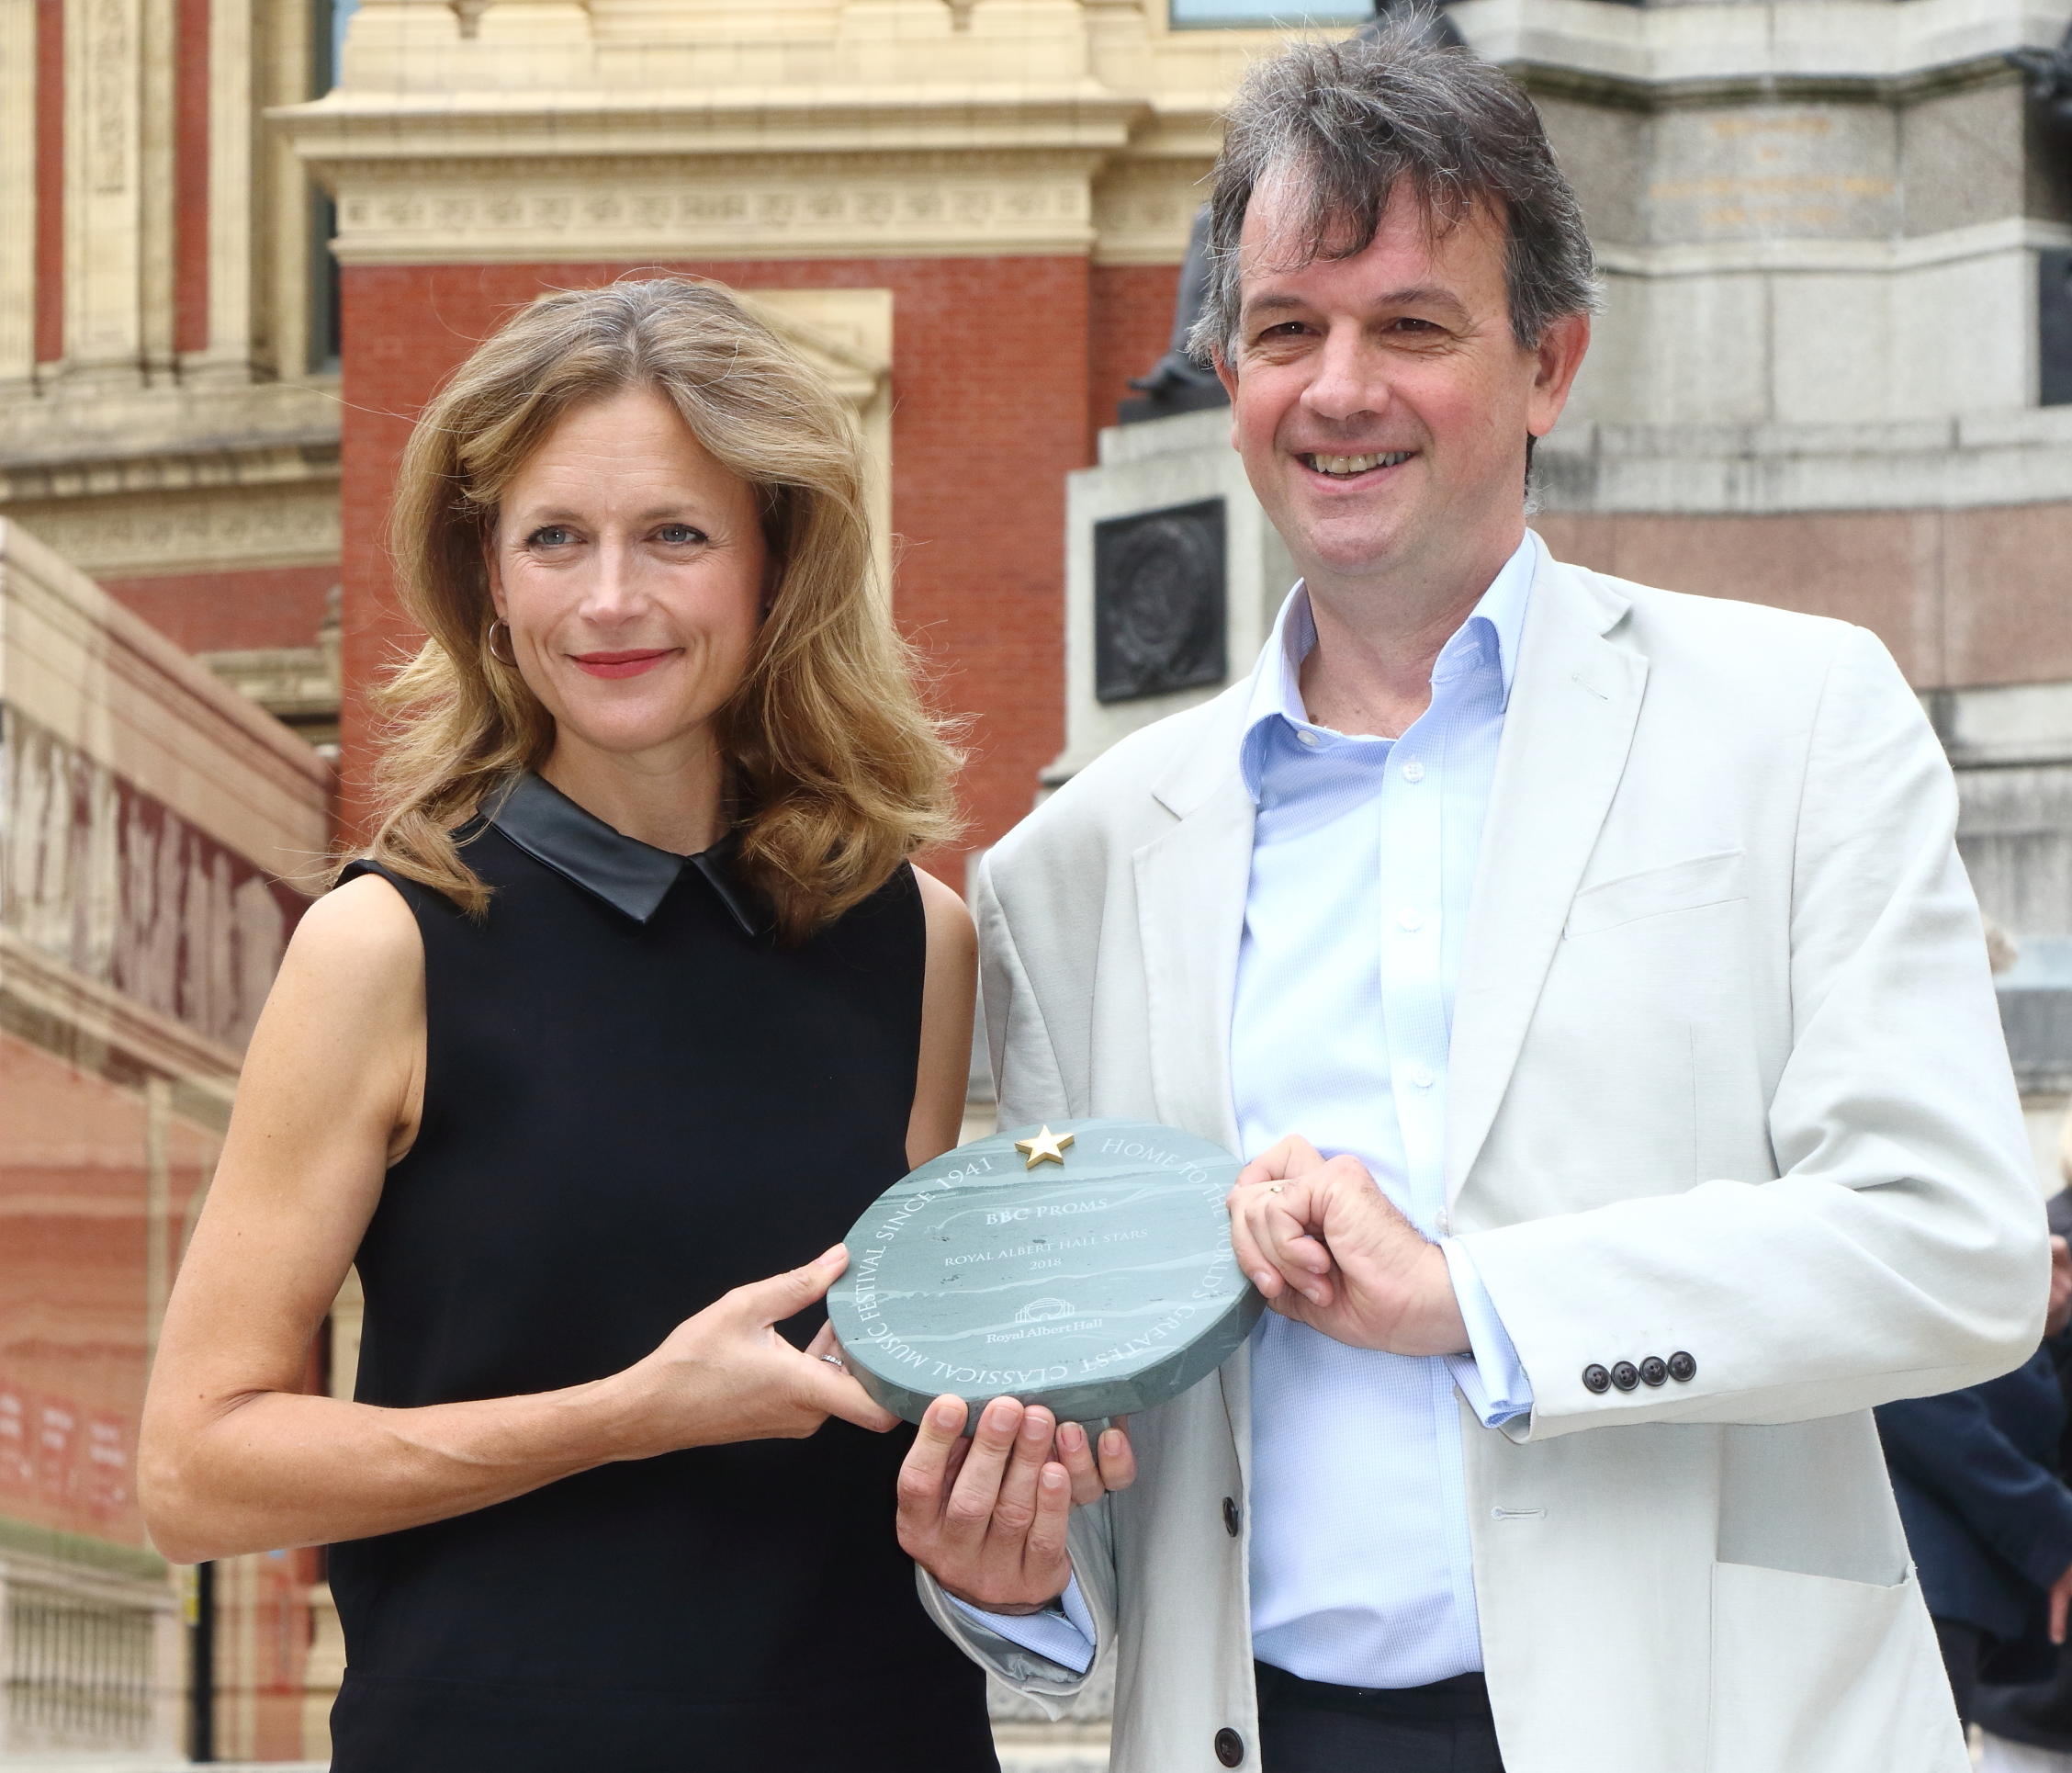 Newscaster Katie Derham and David Pickard at the Royal Albert Hall 'Walk Of Fame' launch, 2018